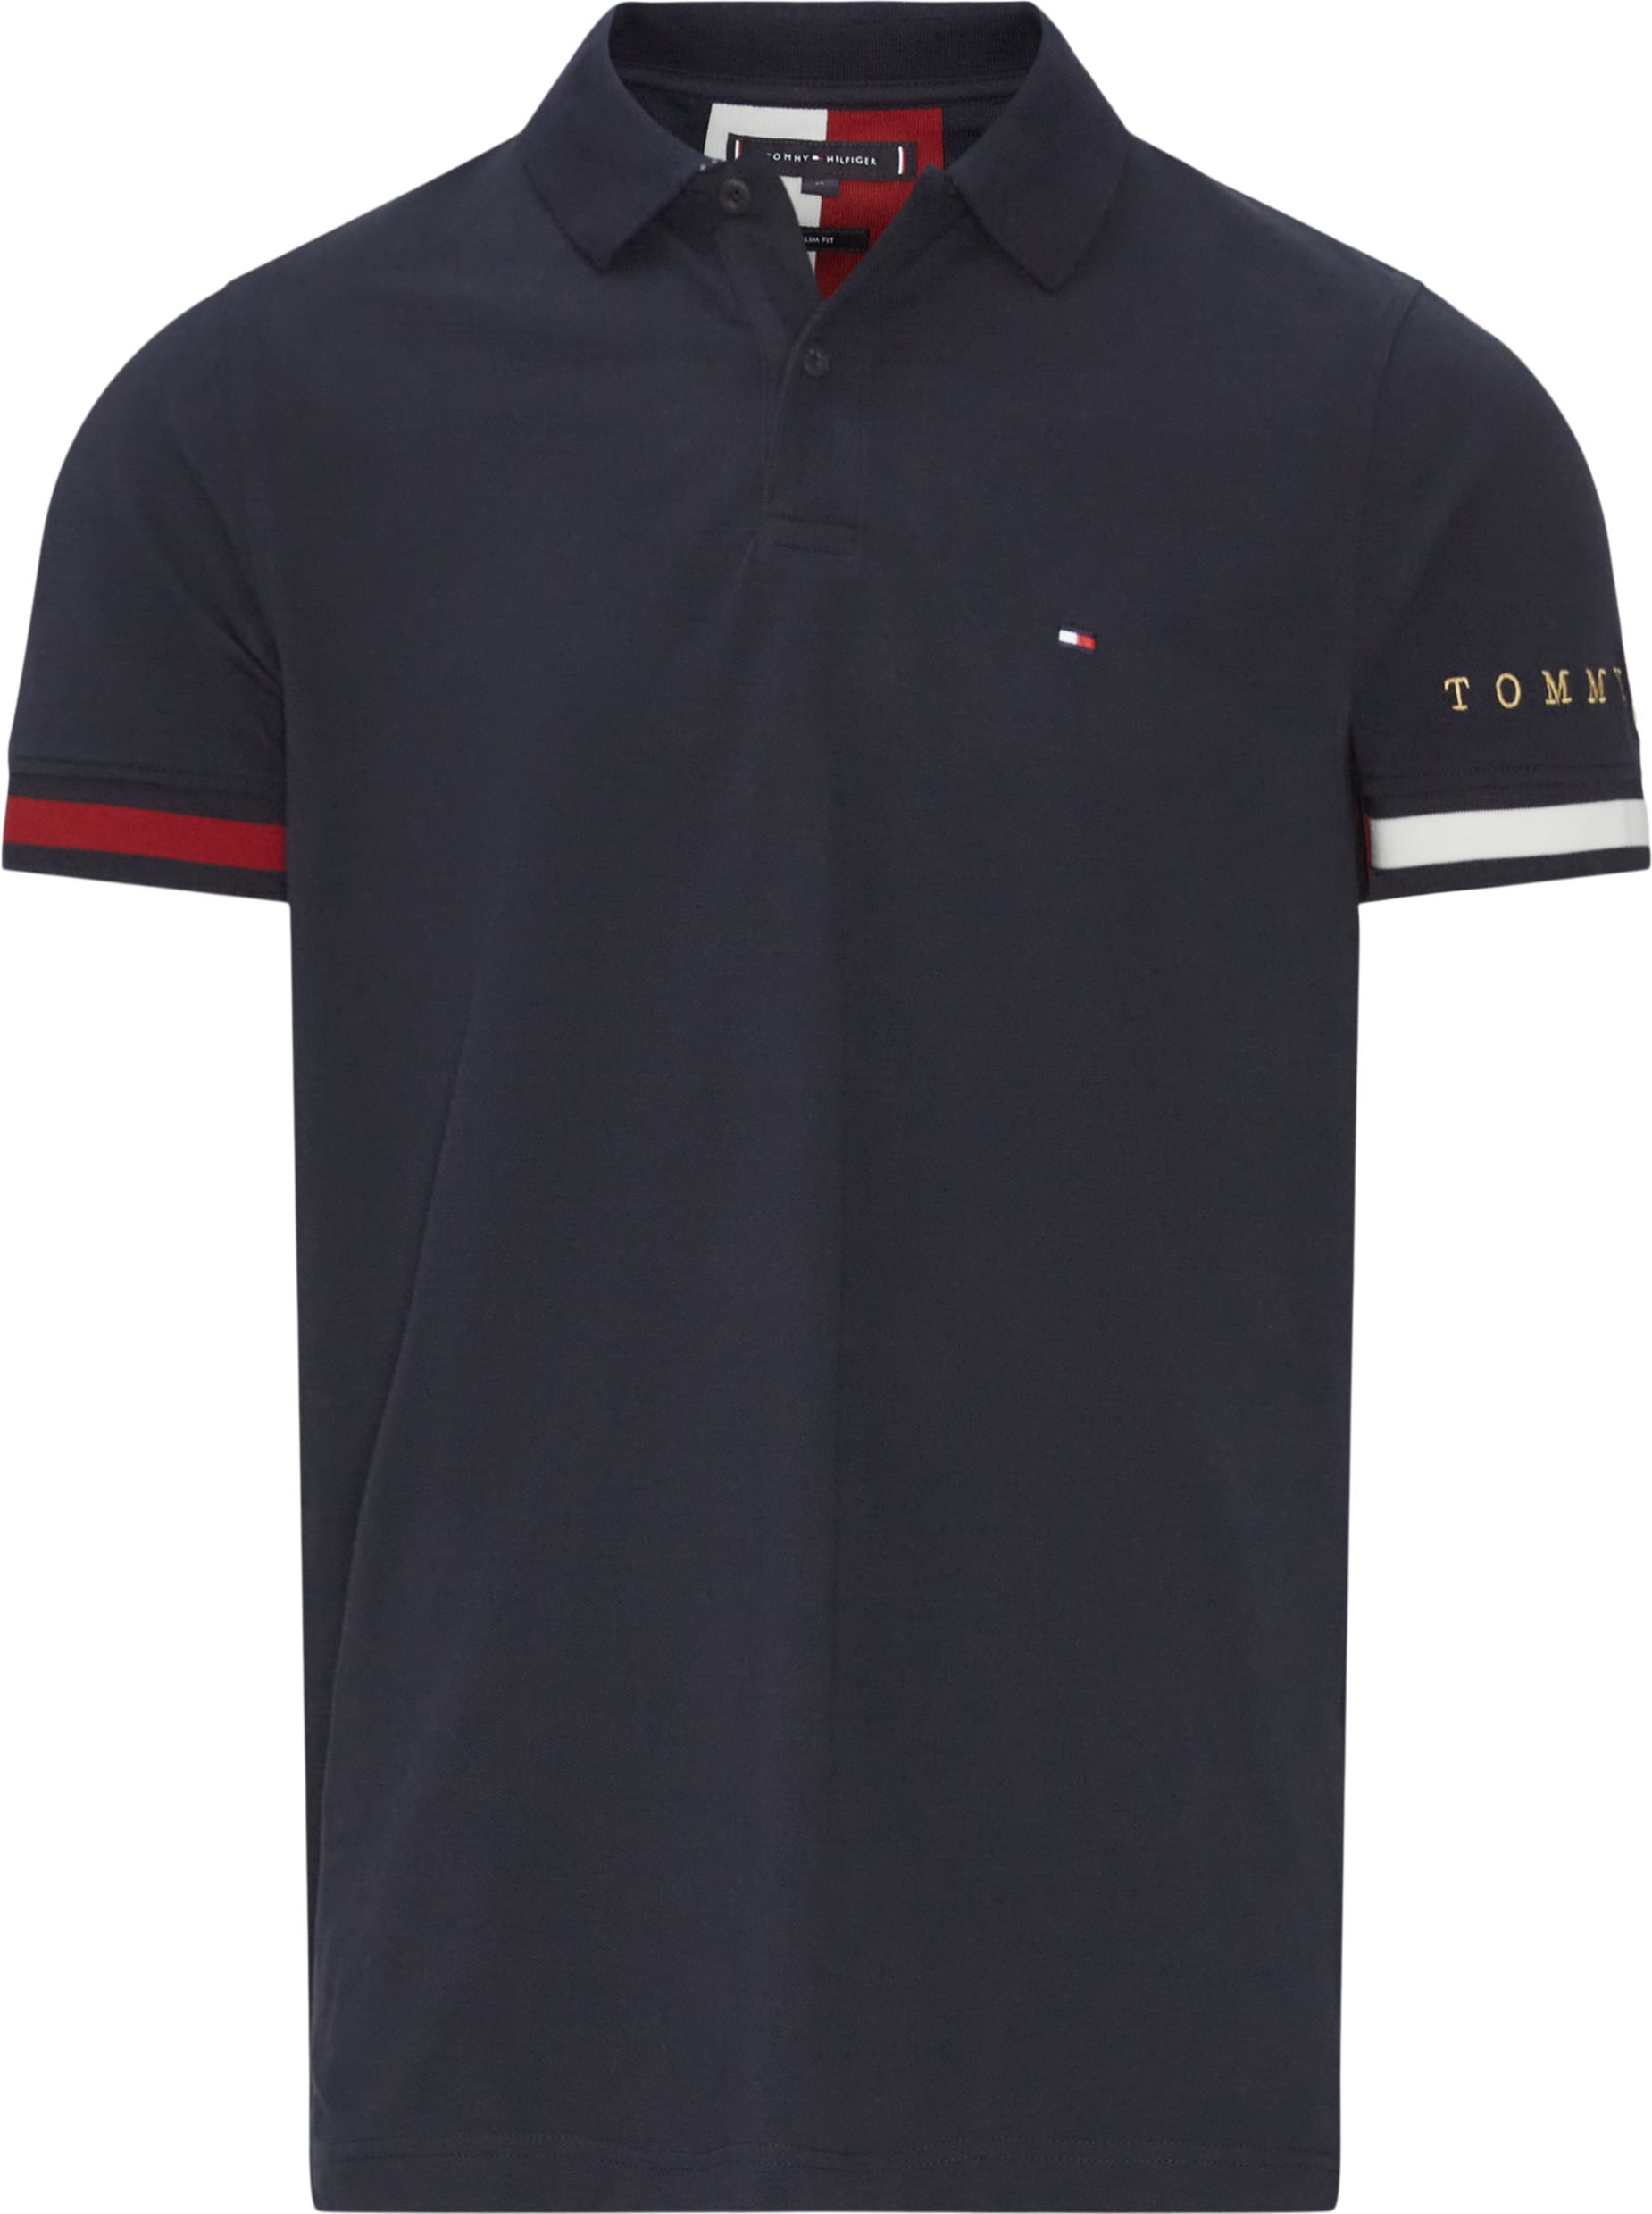 Tommy T-shirts NAVY 67 23961 from Hilfiger CUFF FLAG ICON SLIM EUR POLO